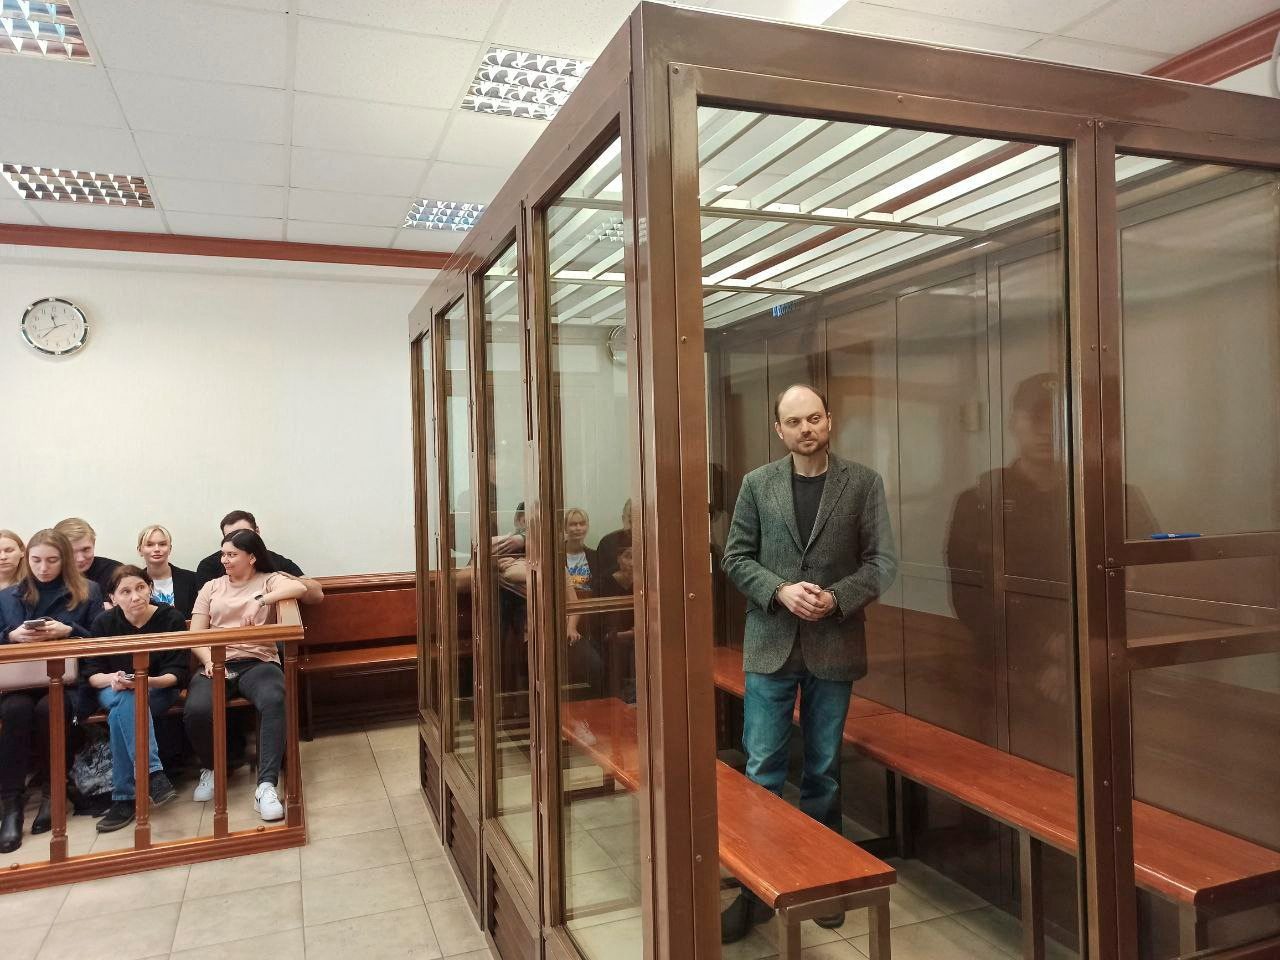 Putin critic jailed in treason case for 25 years in harshest verdict for years